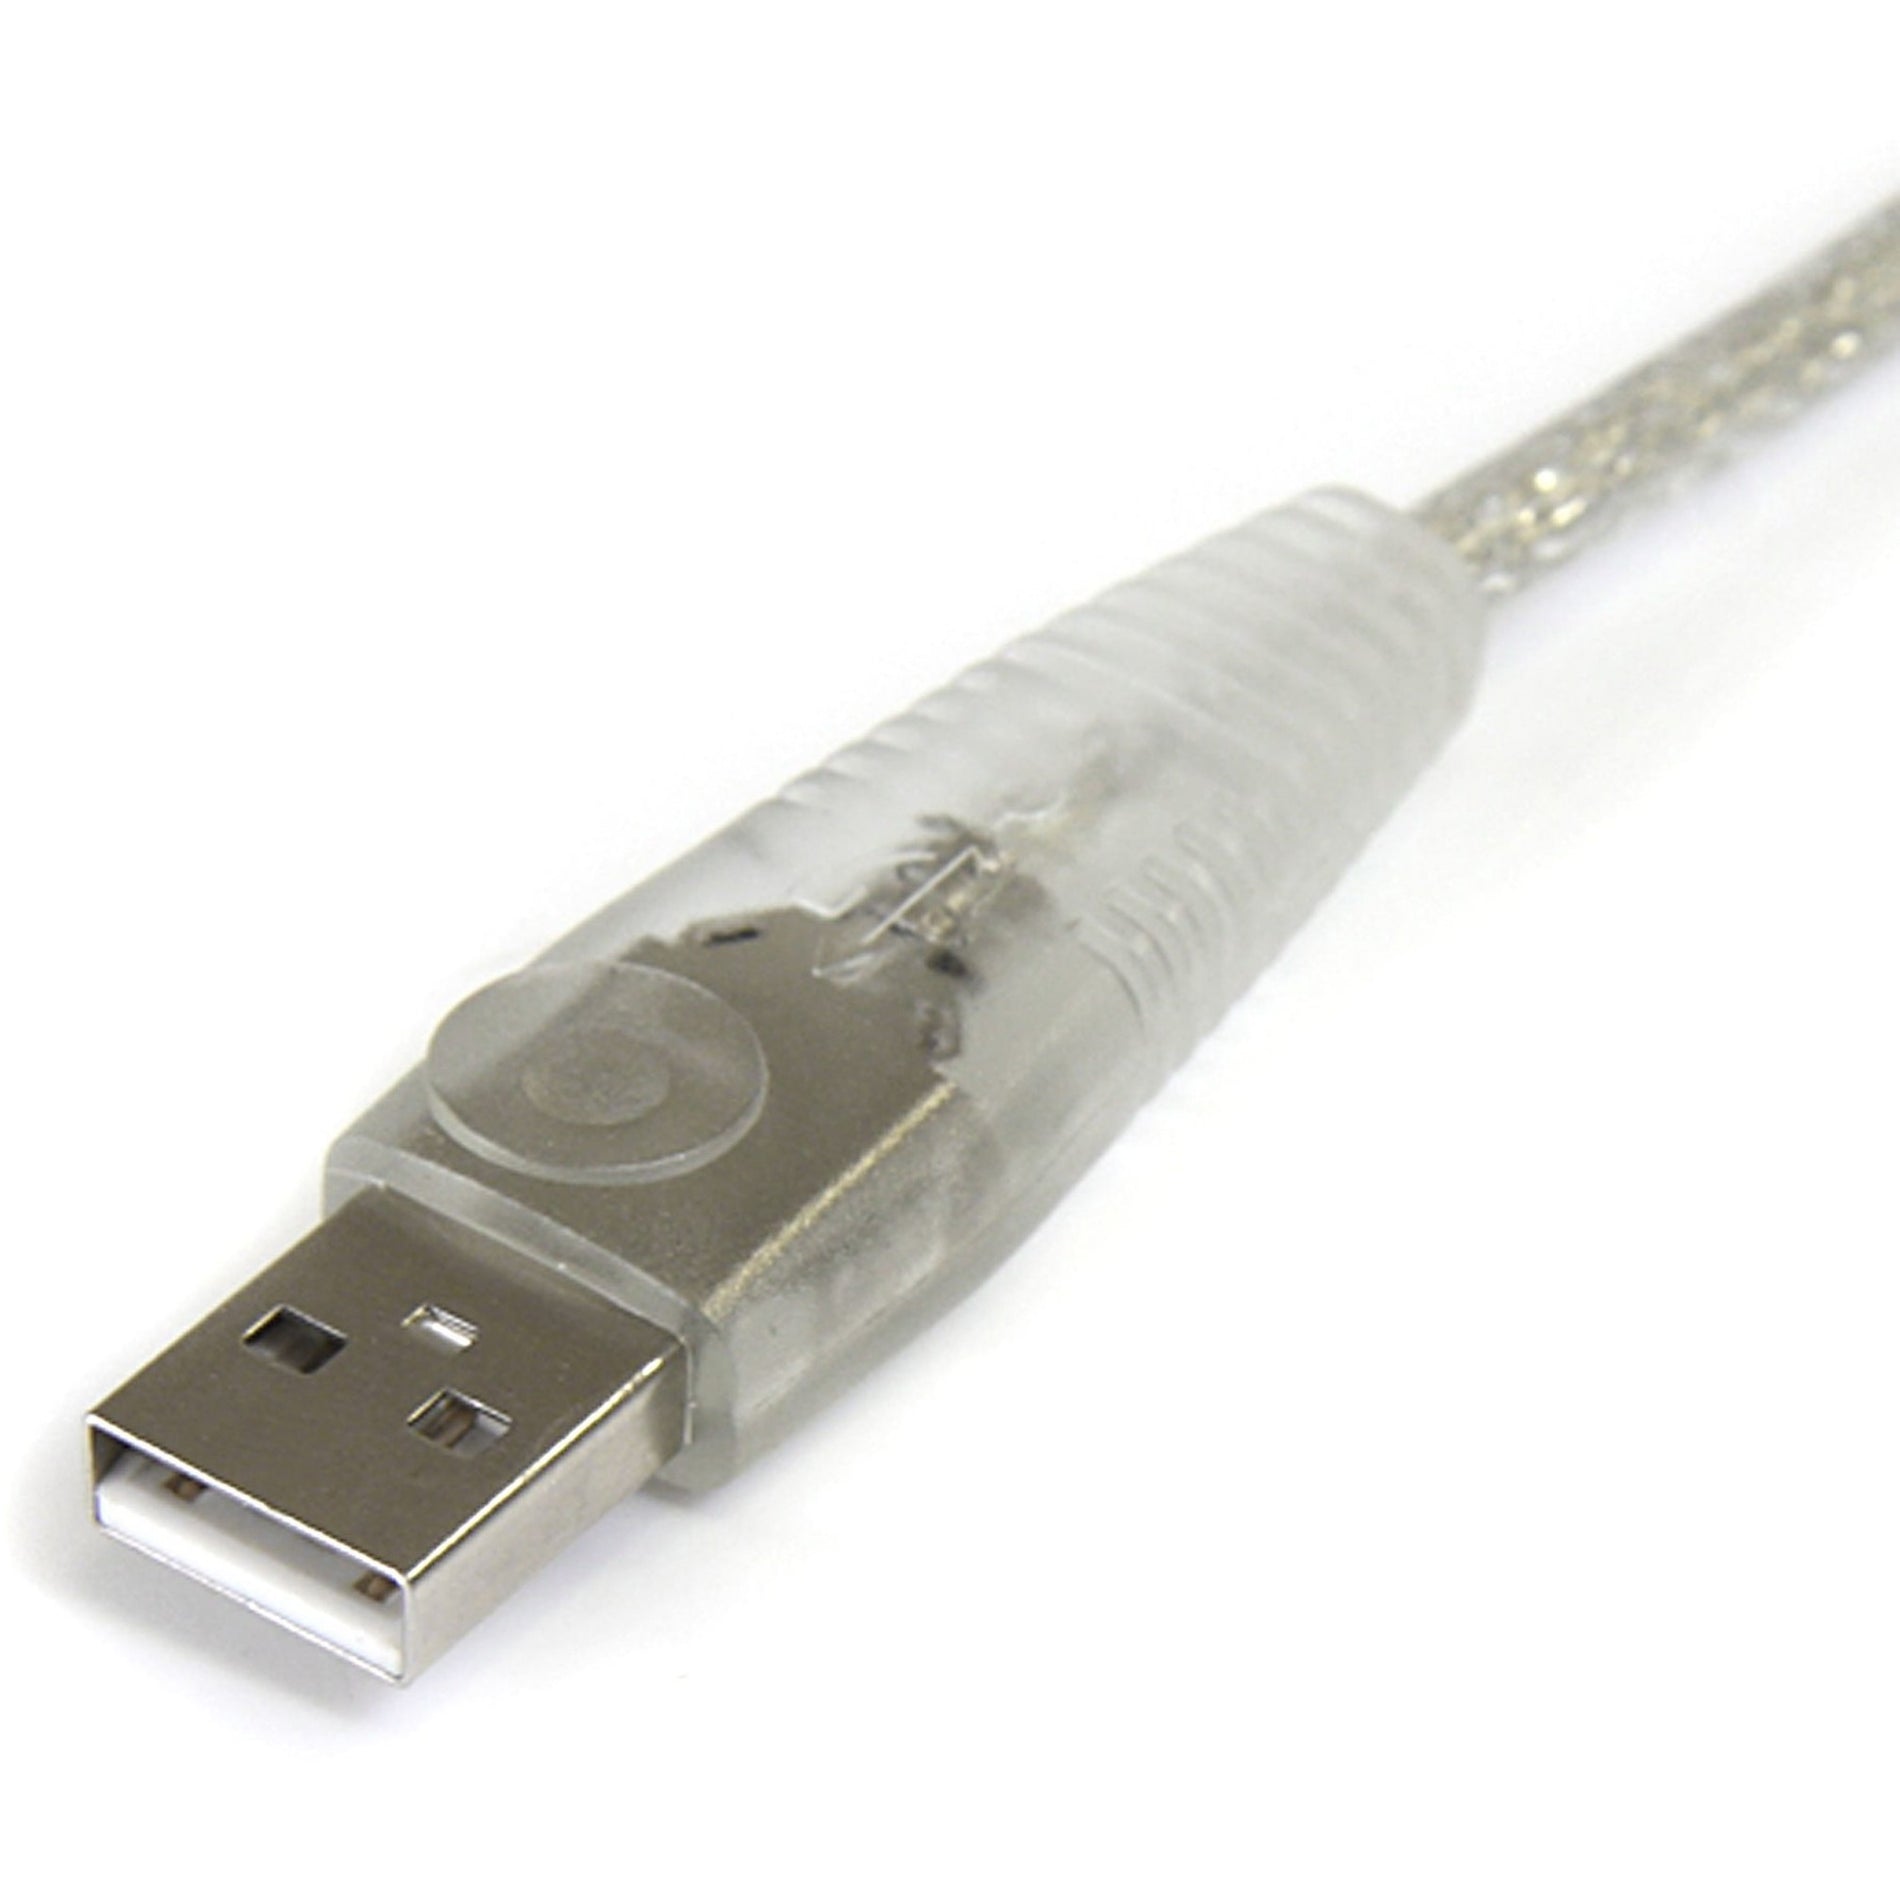 StarTech.com USB2HAB10T 10 ft Transparent USB 2.0 Cable - A to B, High-Speed Data Transfer, Lifetime Warranty